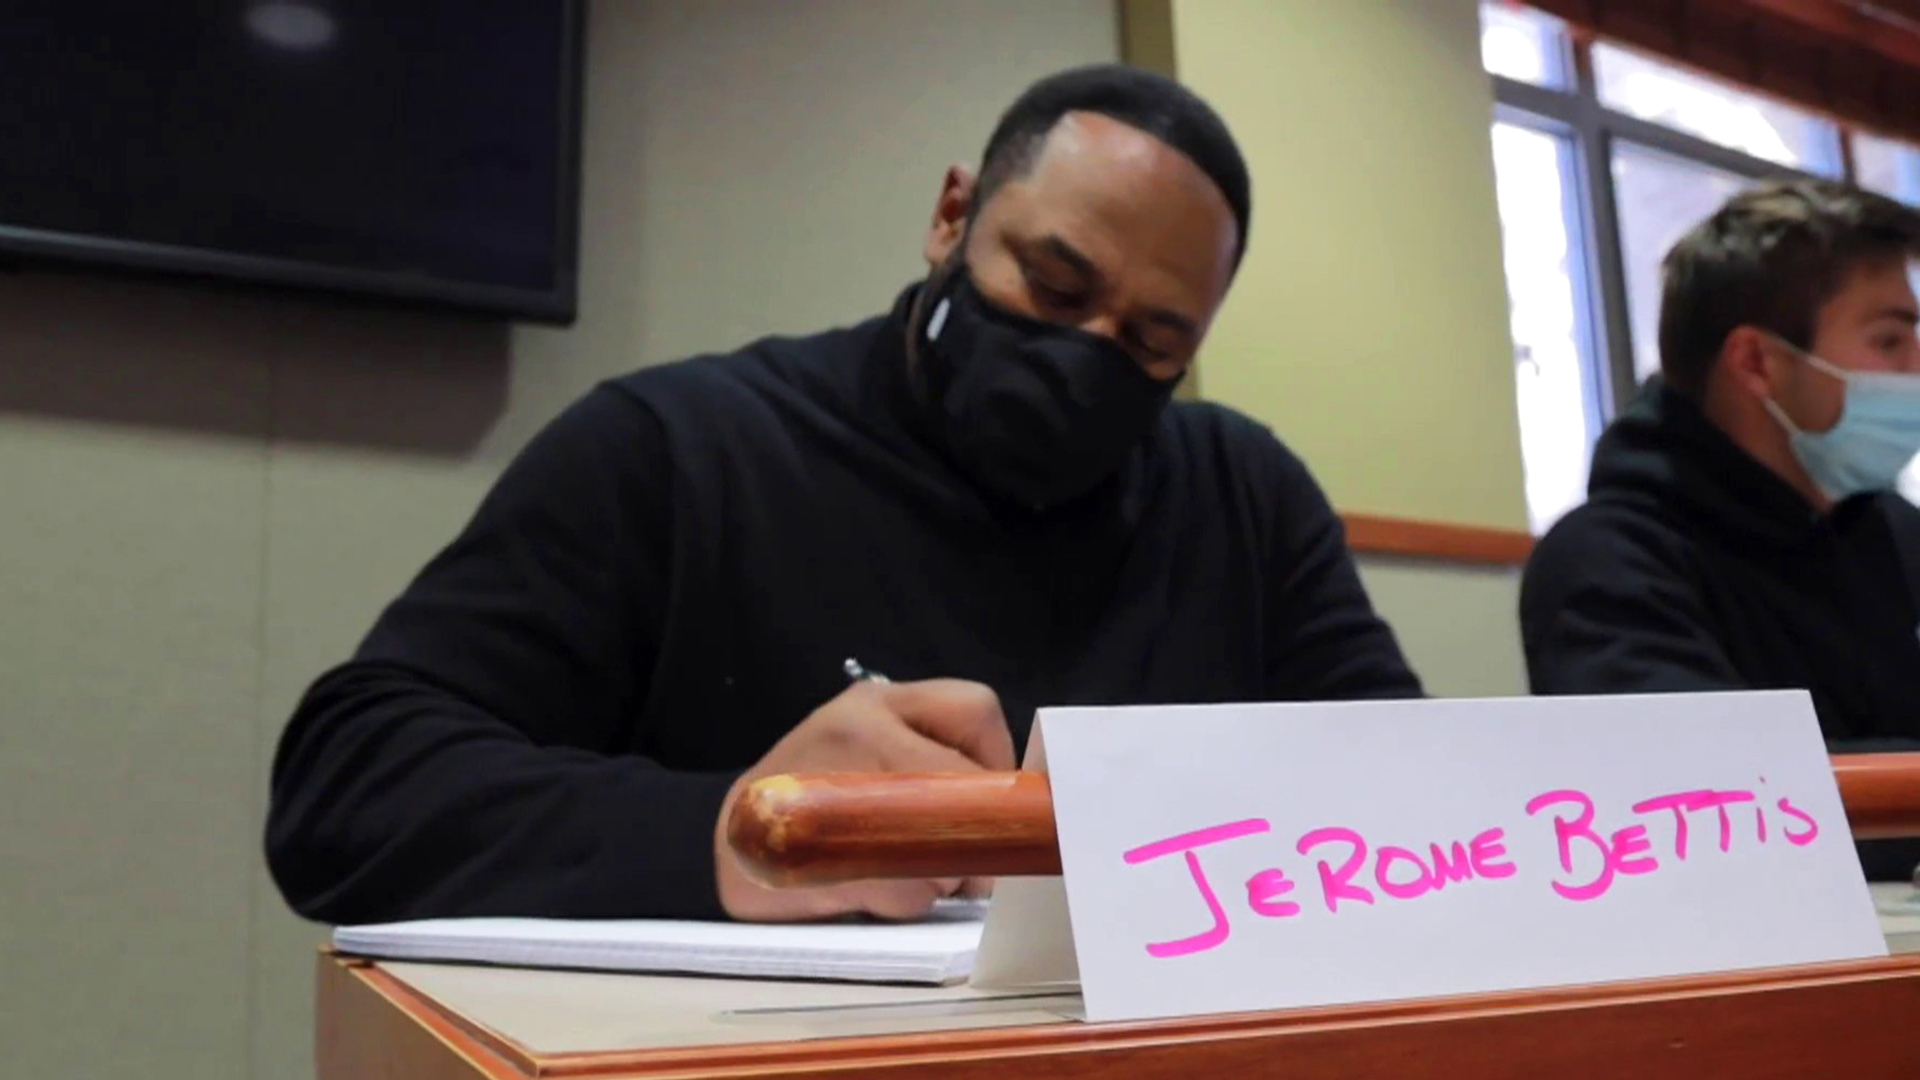 Jerome Bettis back on campus to finish Notre Dame degree